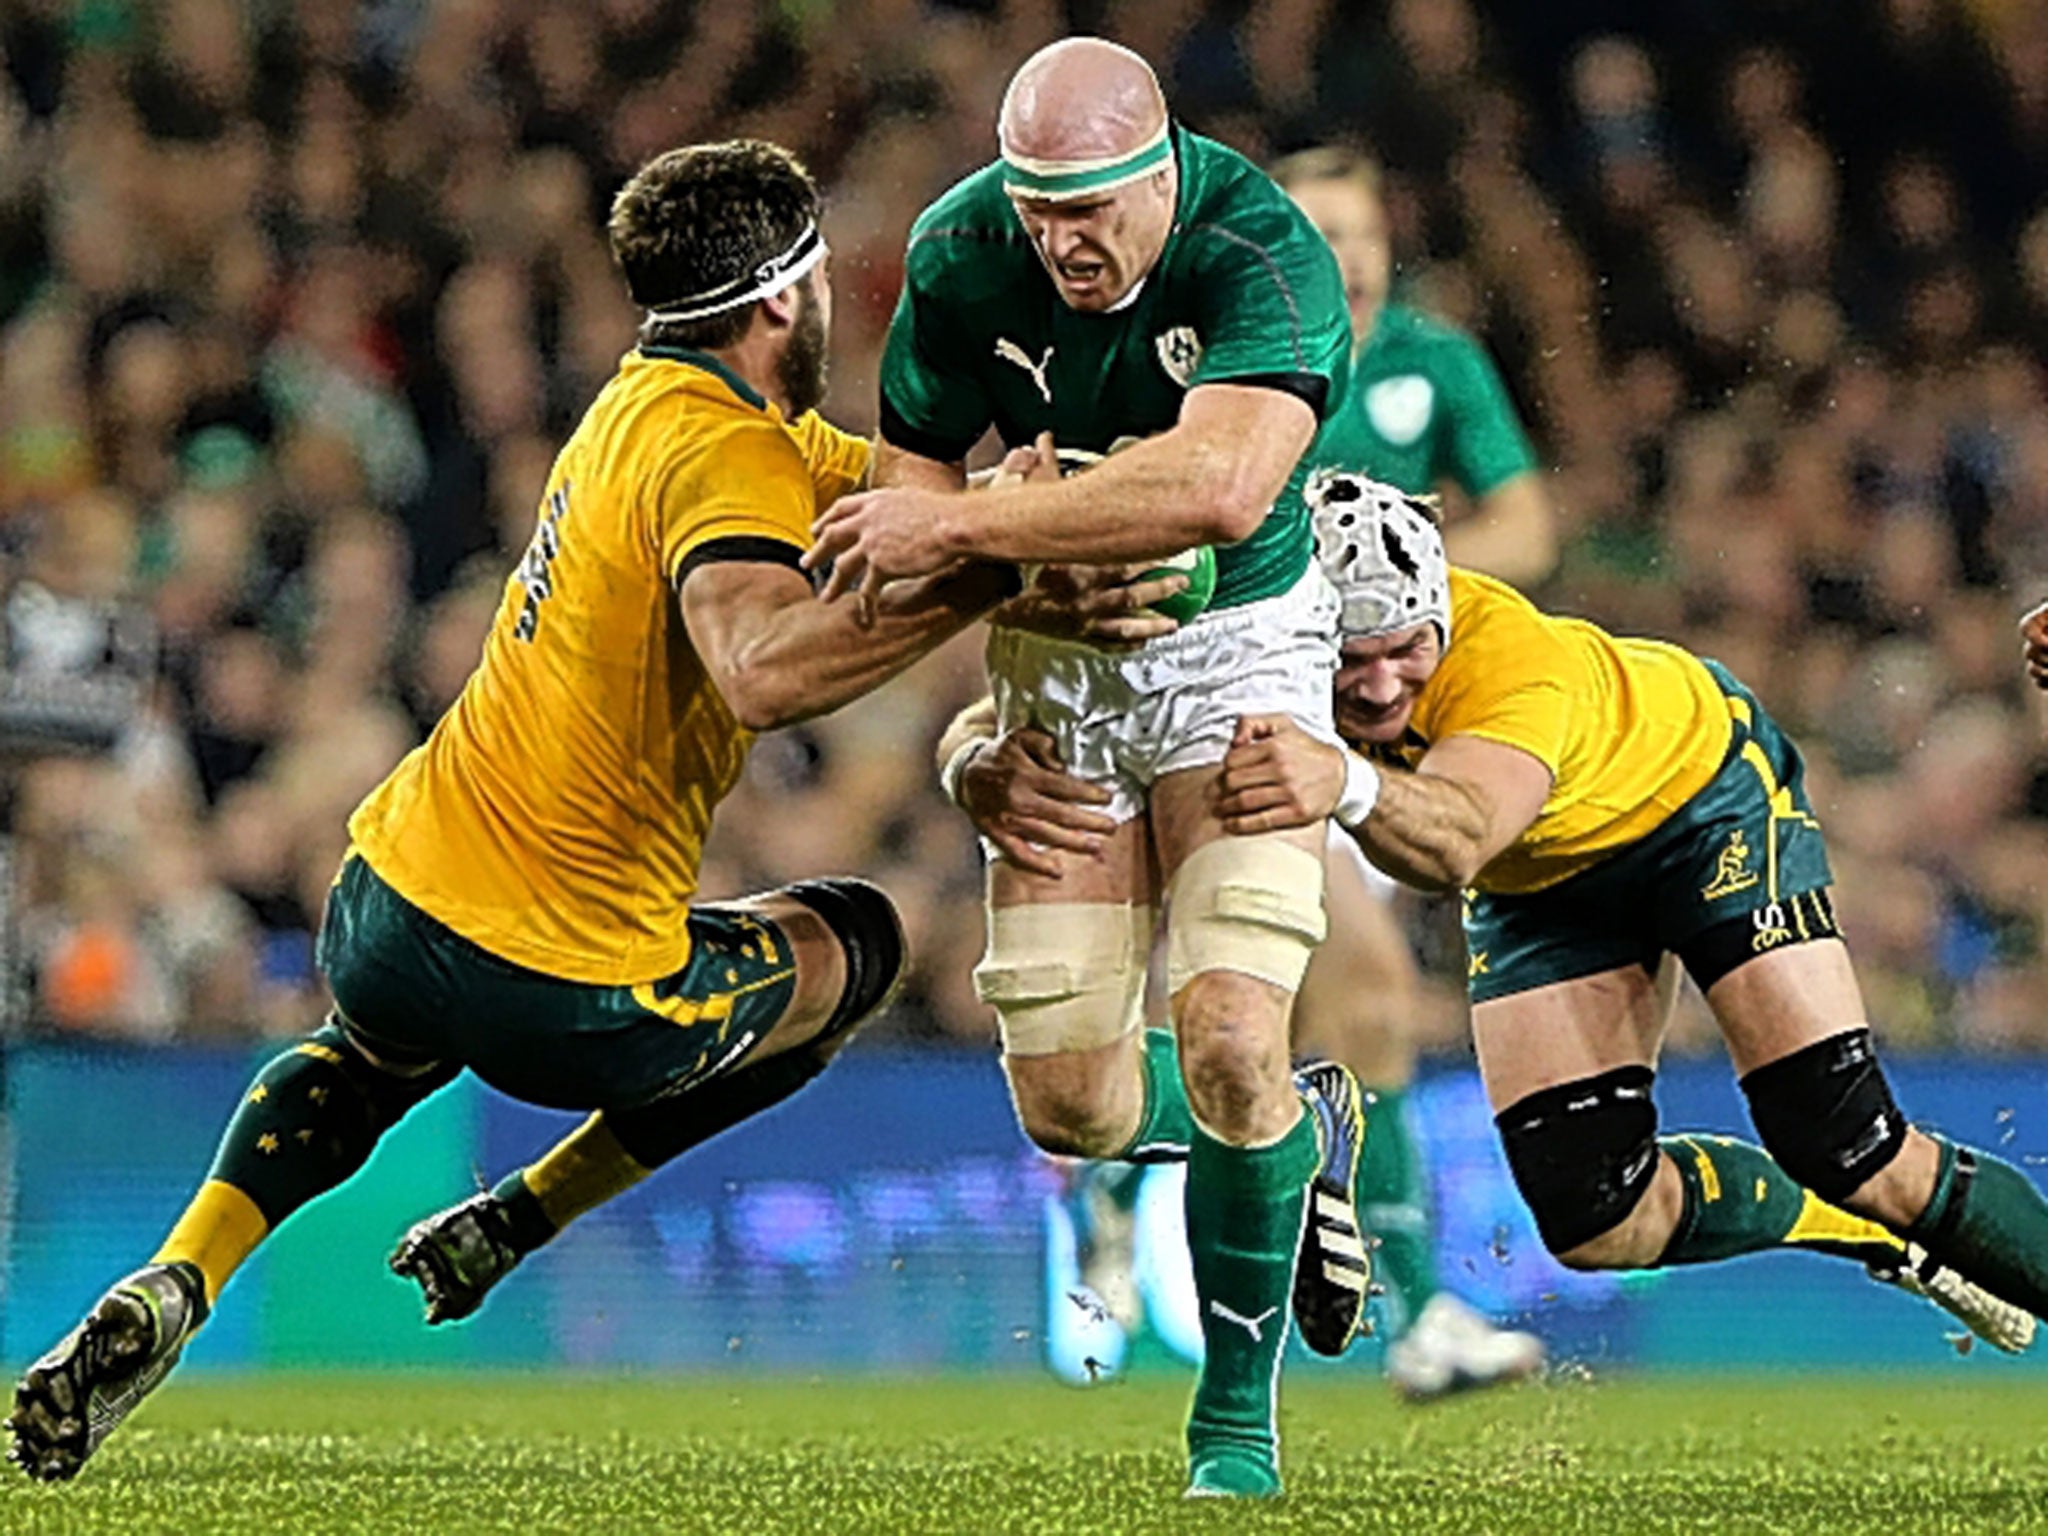 Paul O’Connell says Ireland were beaten physically in last year’s defeat to Australia